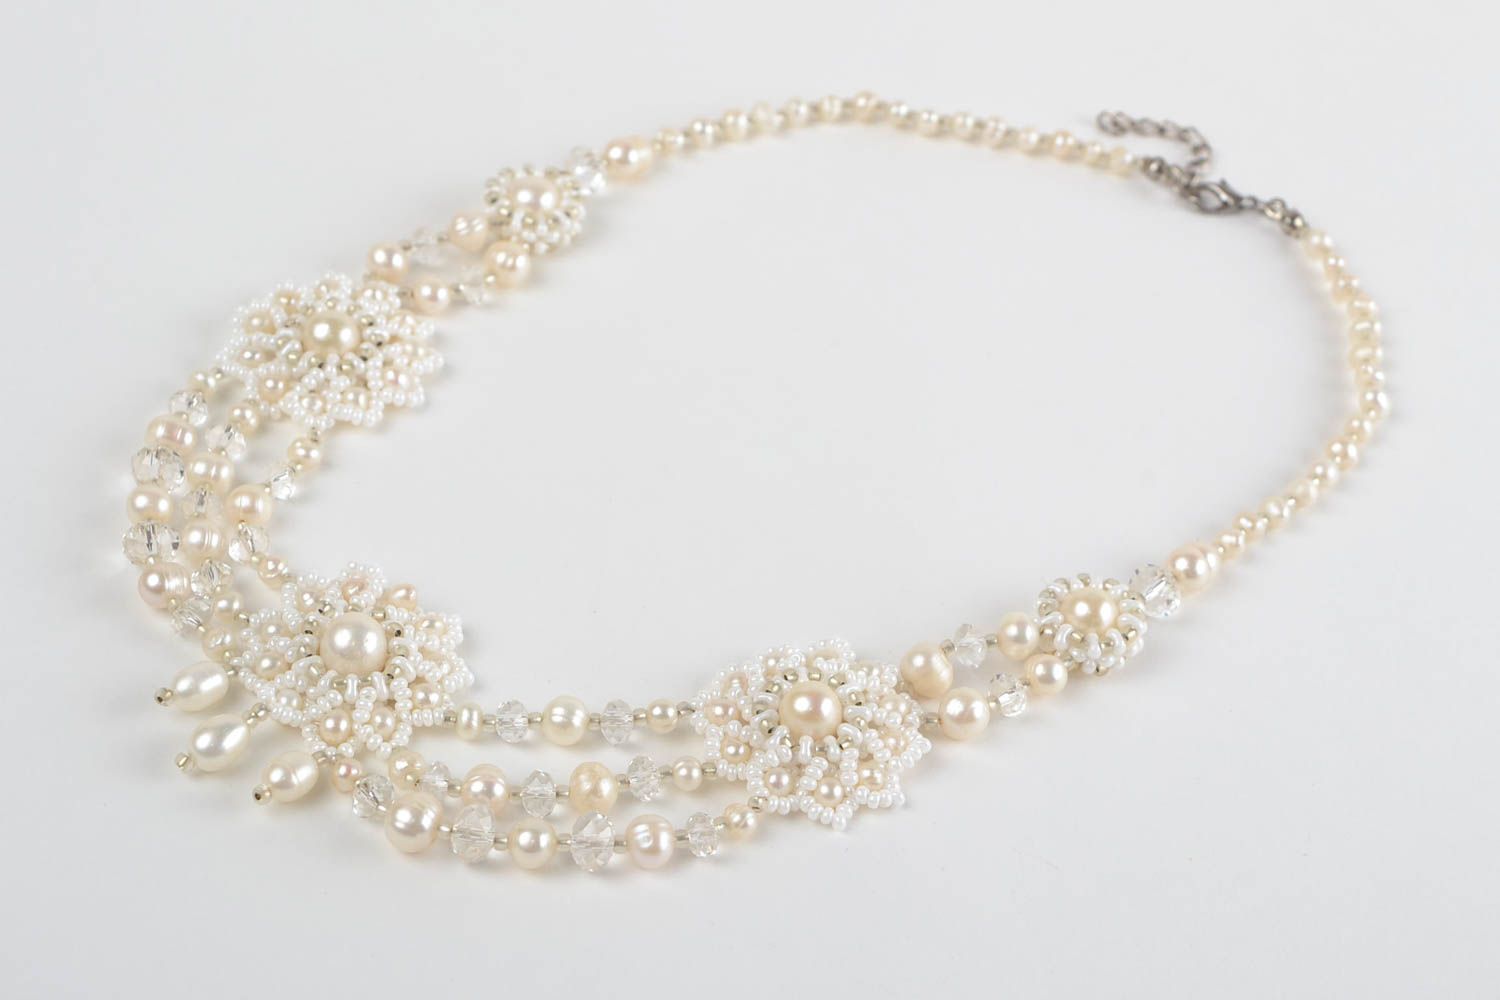 Beautiful festive handmade white necklace made of beads and natural stones photo 4